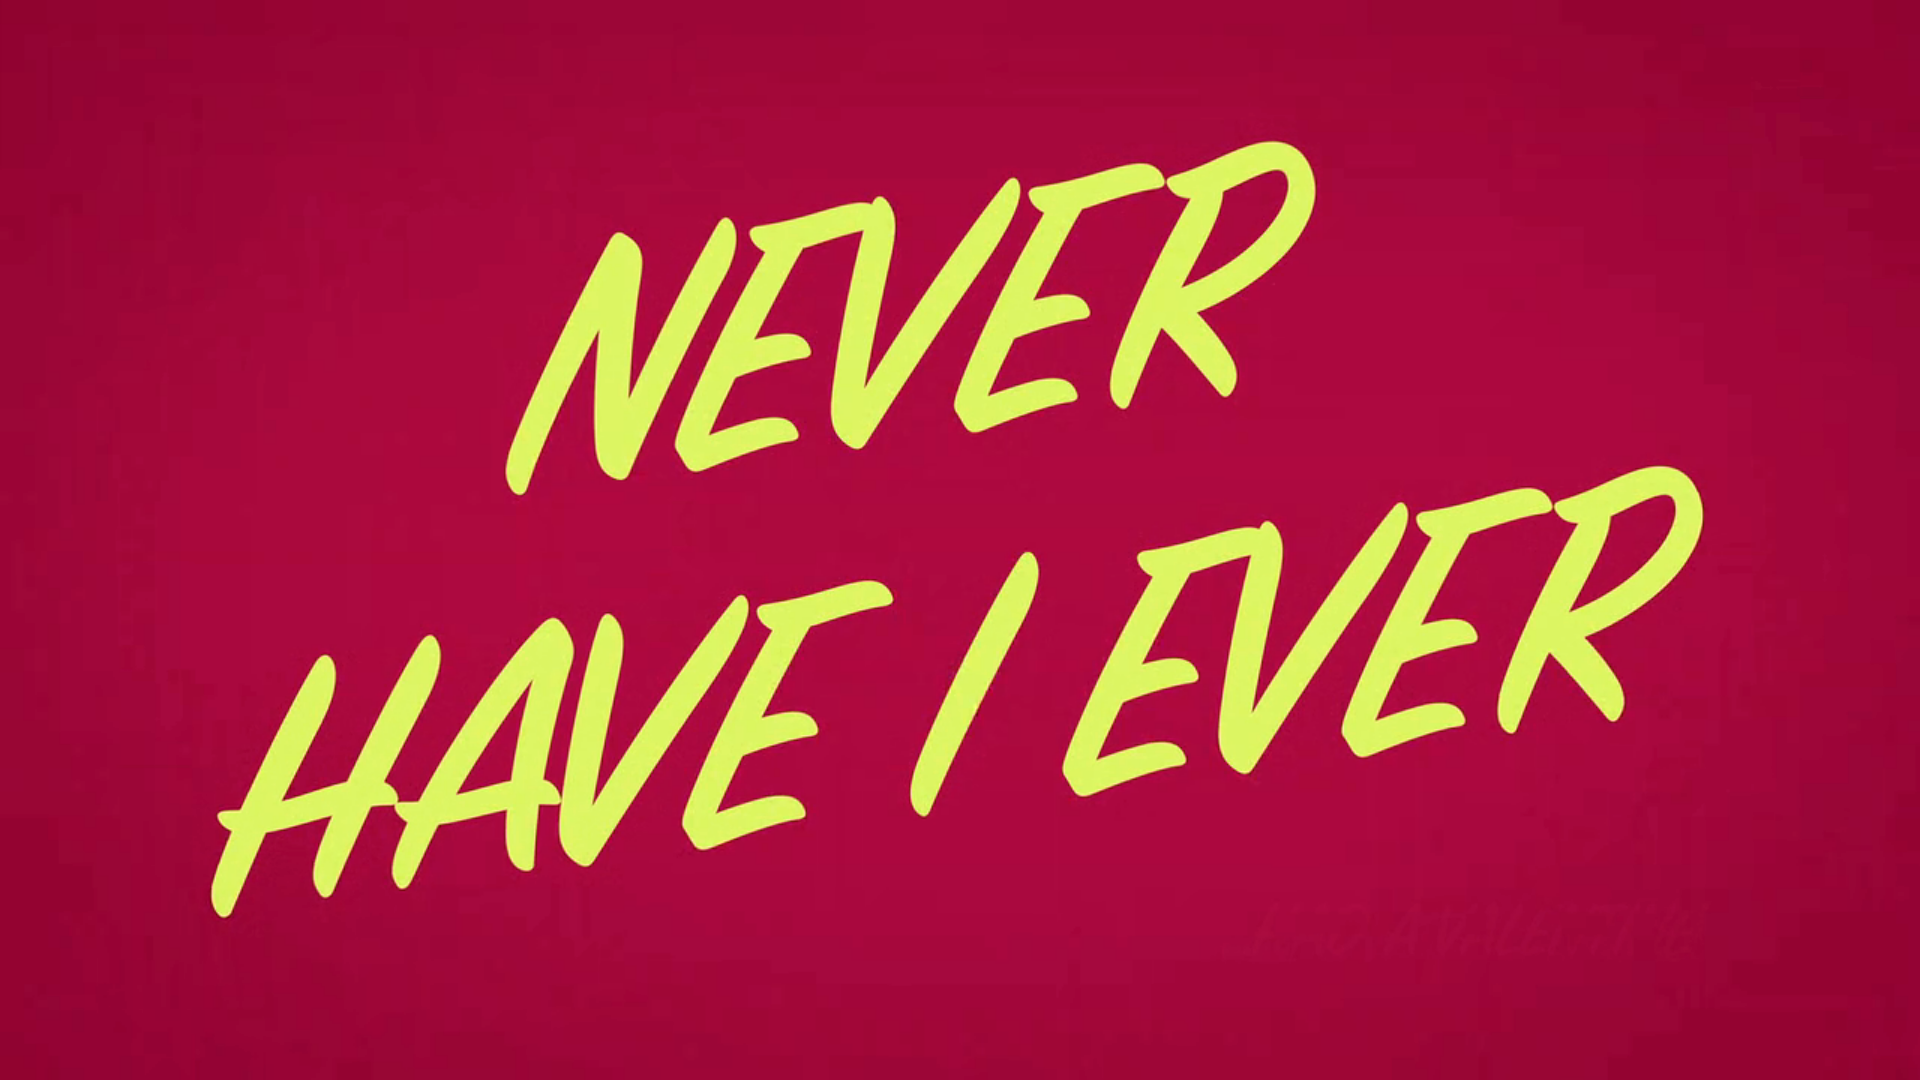 Never Have I Ever (TV series)